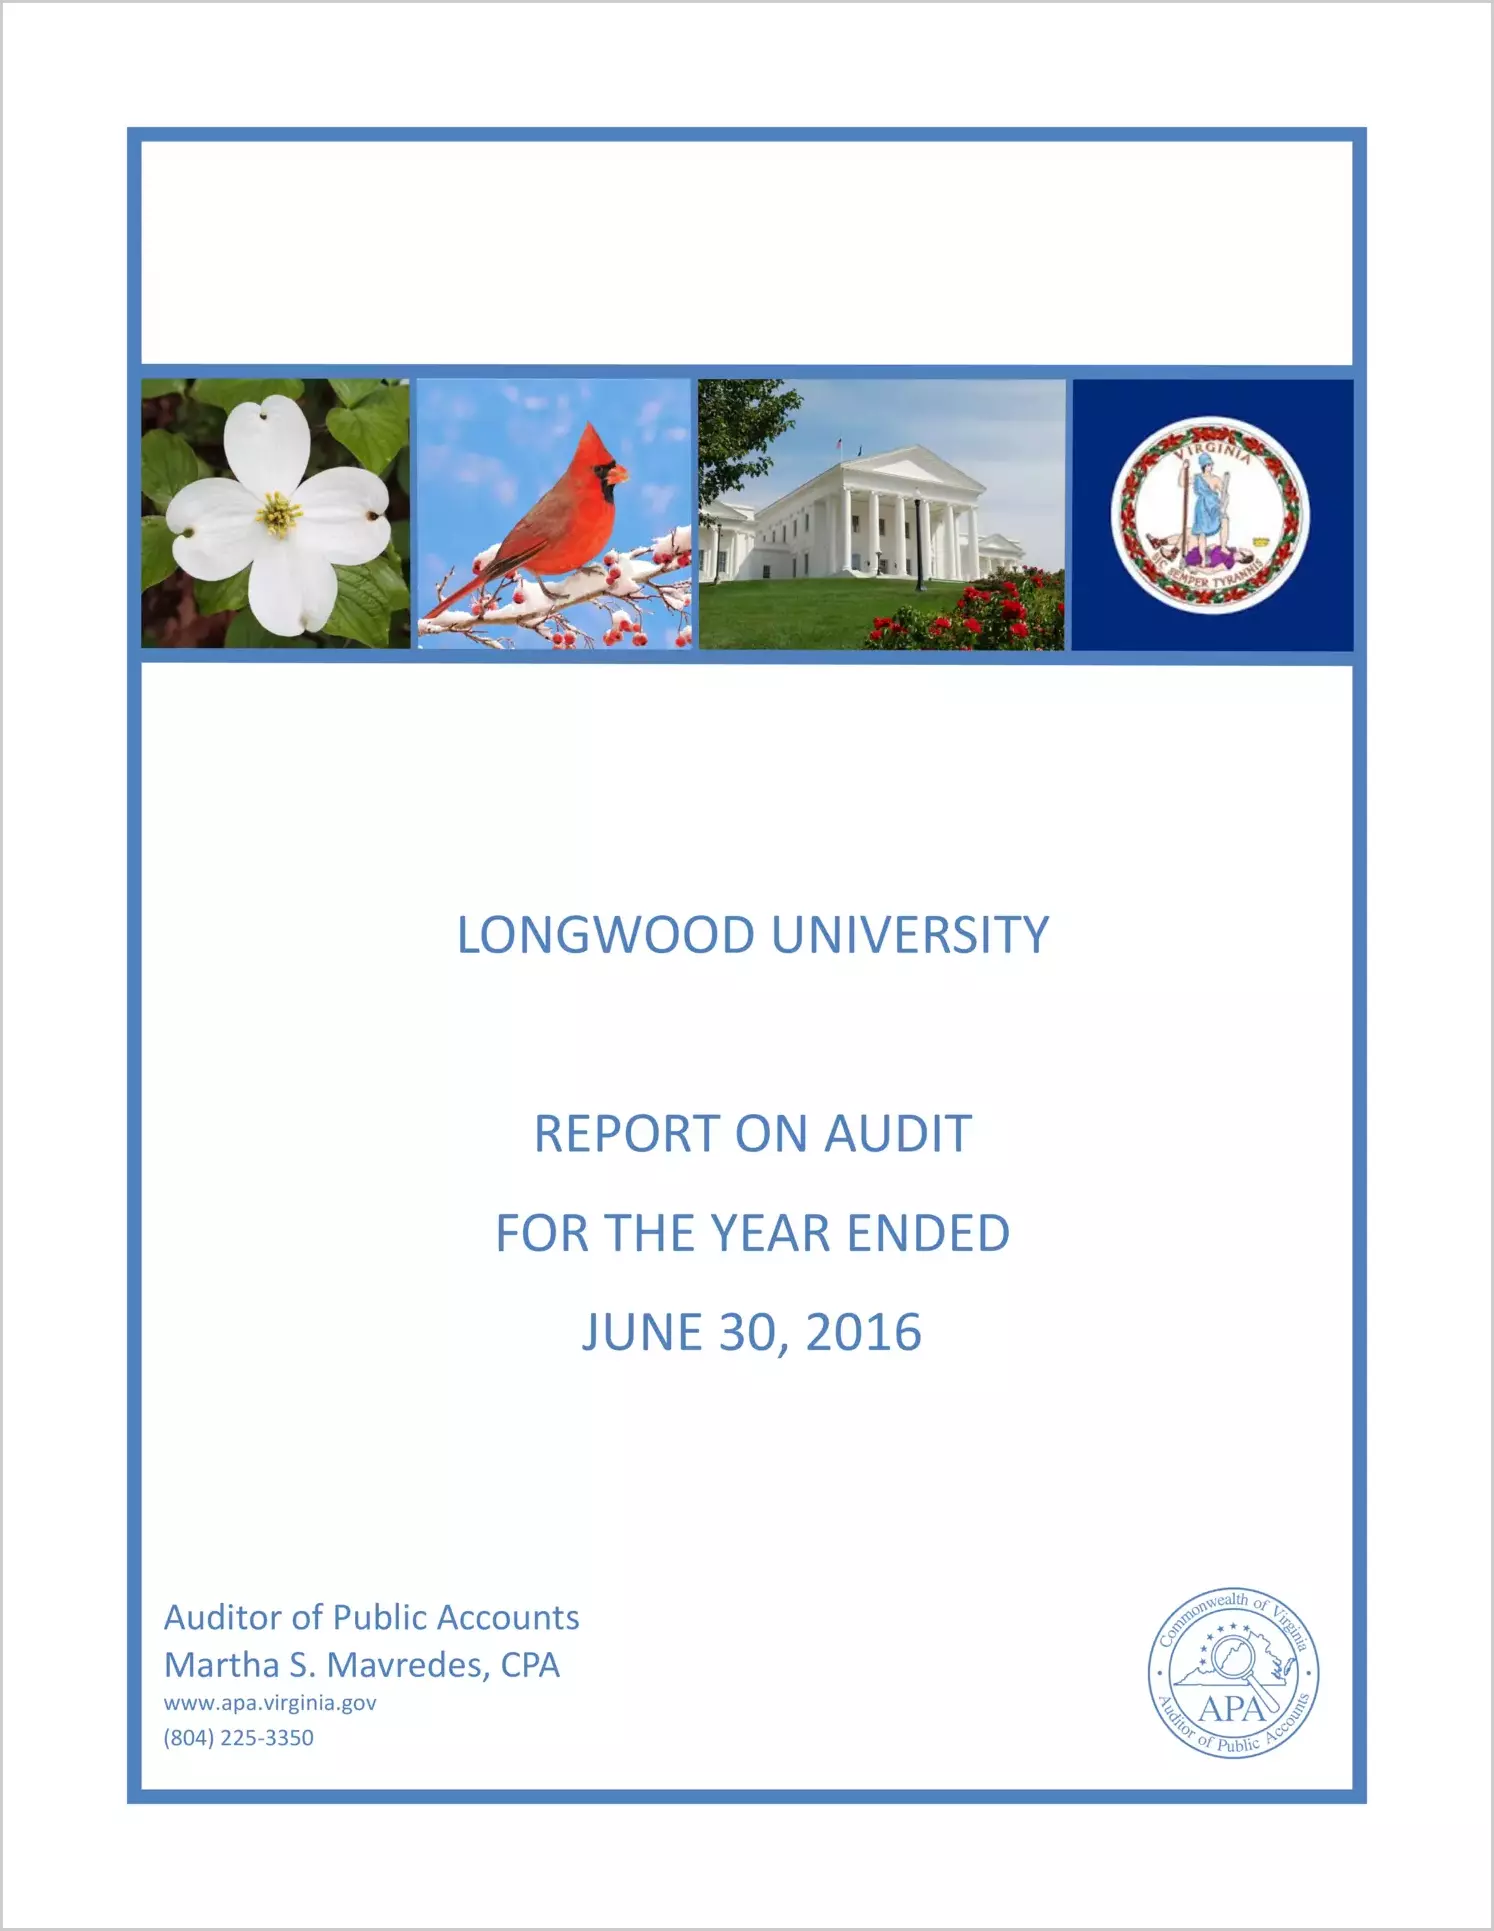 Longwood University for the year ended June 30, 2016